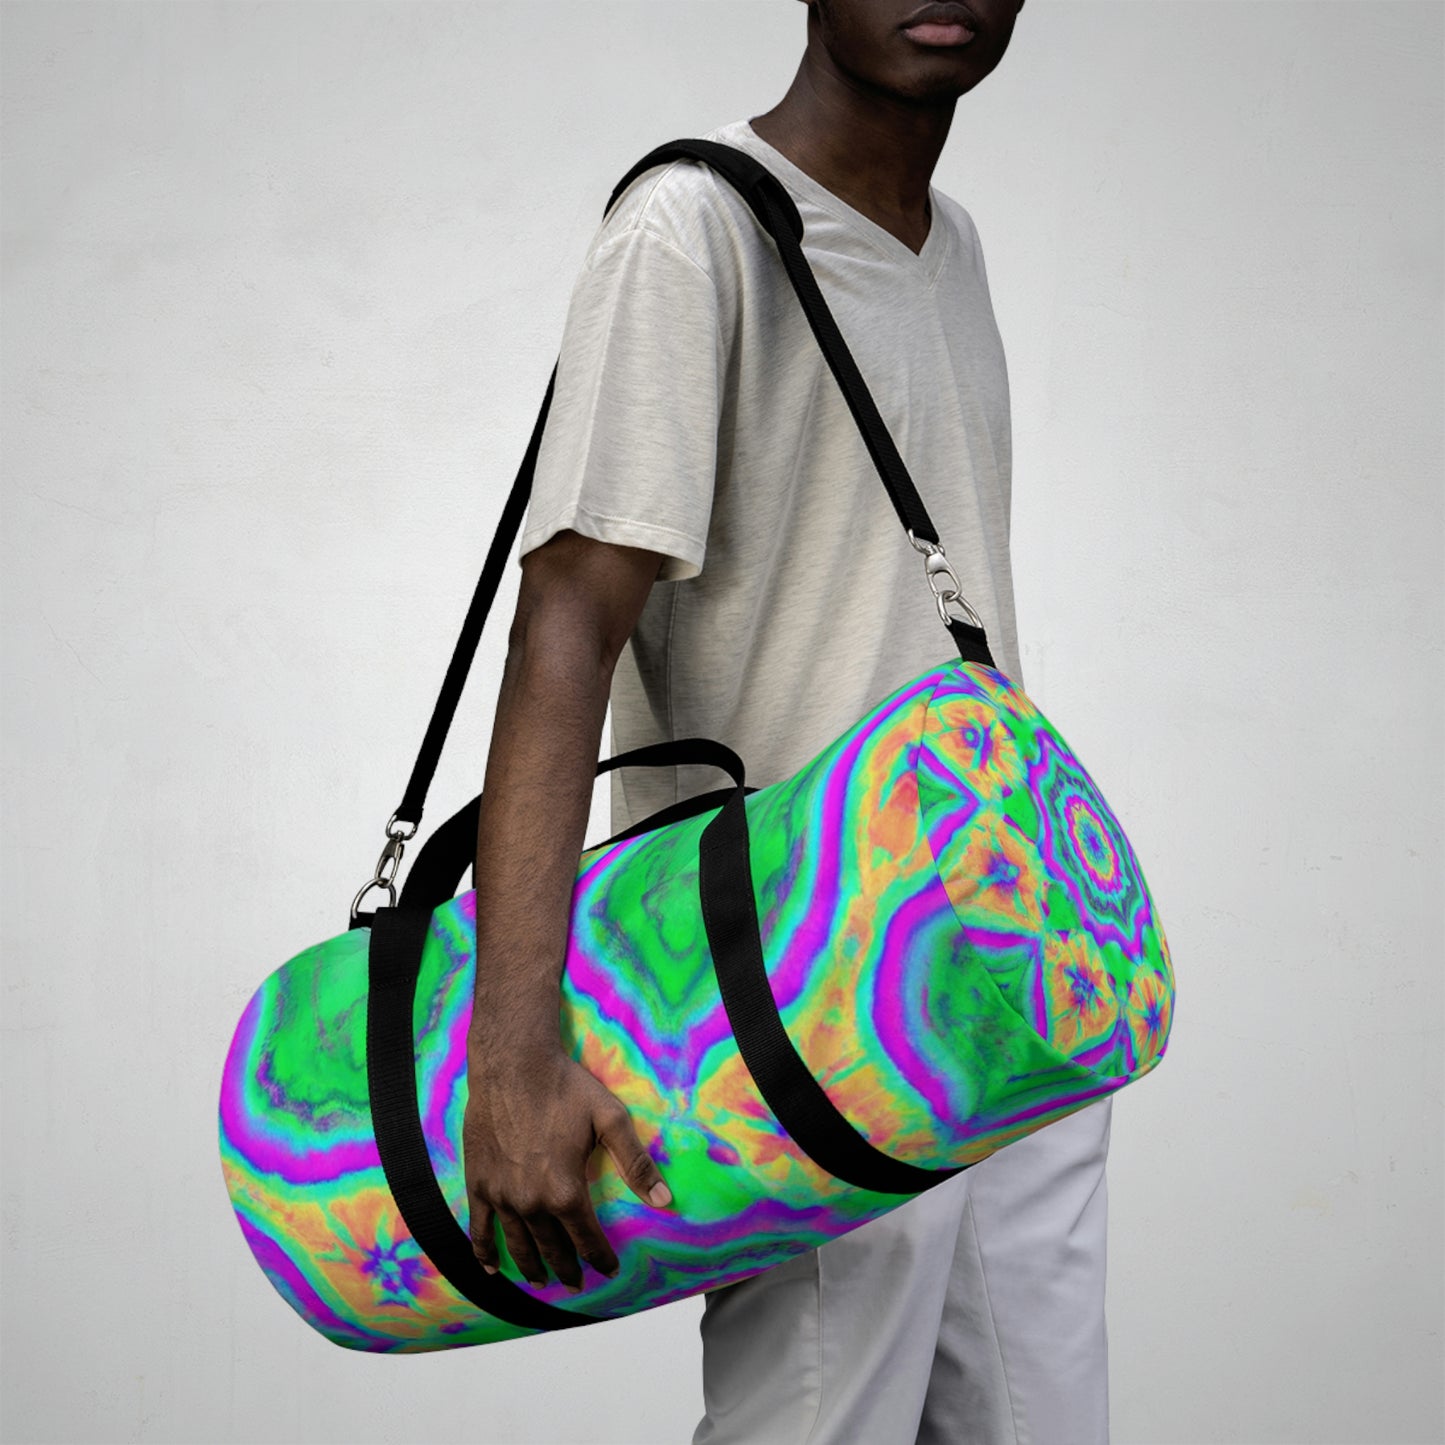 Quillmore - Psychedelic Duffel Bag